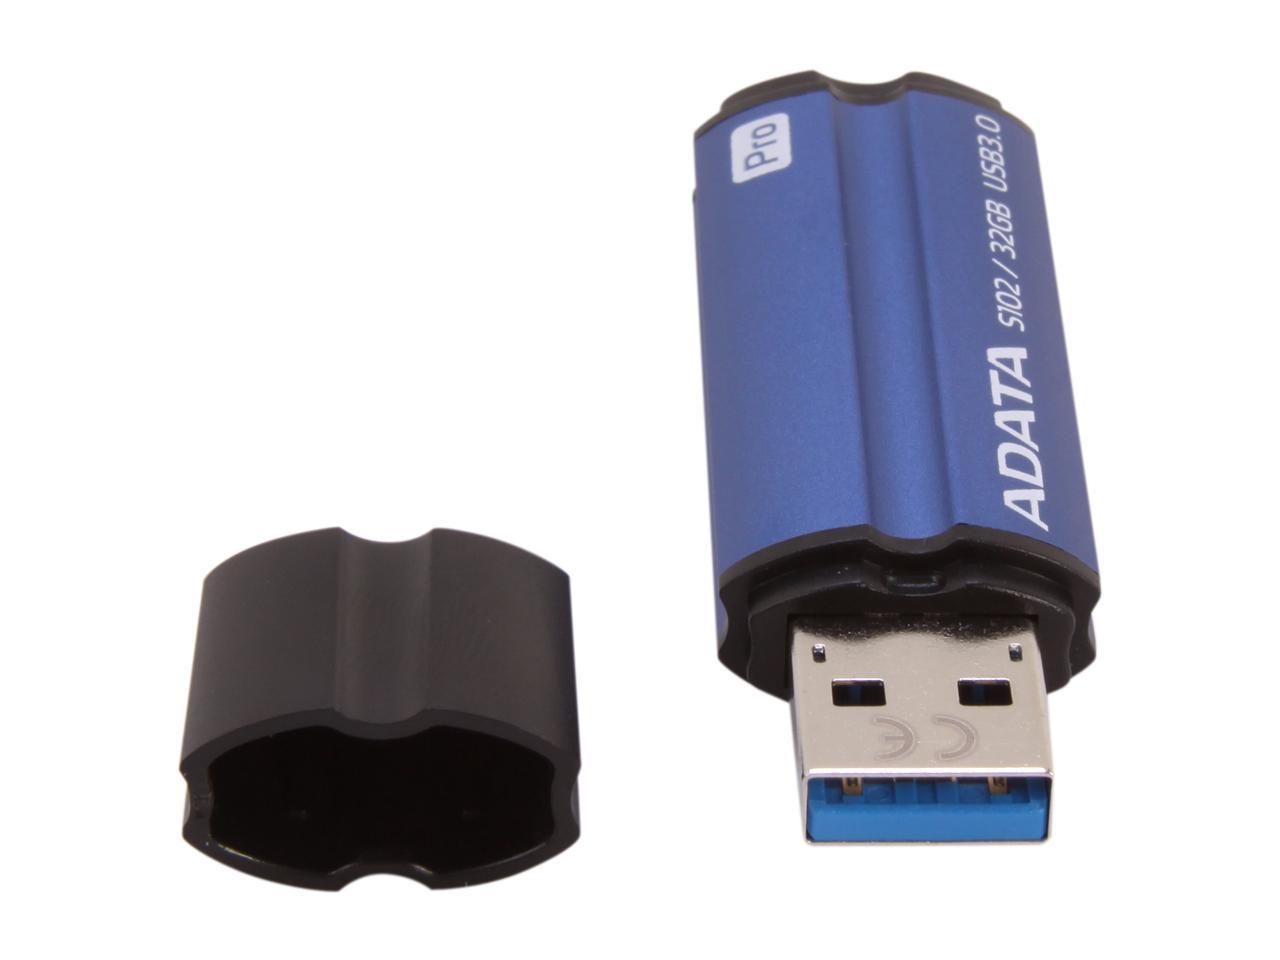 Adata 128Gb S102 Pro Advanced Usb 3.0 Flash Drive, Speed Up To 100Mb/S (As102P-128G-Rgy)